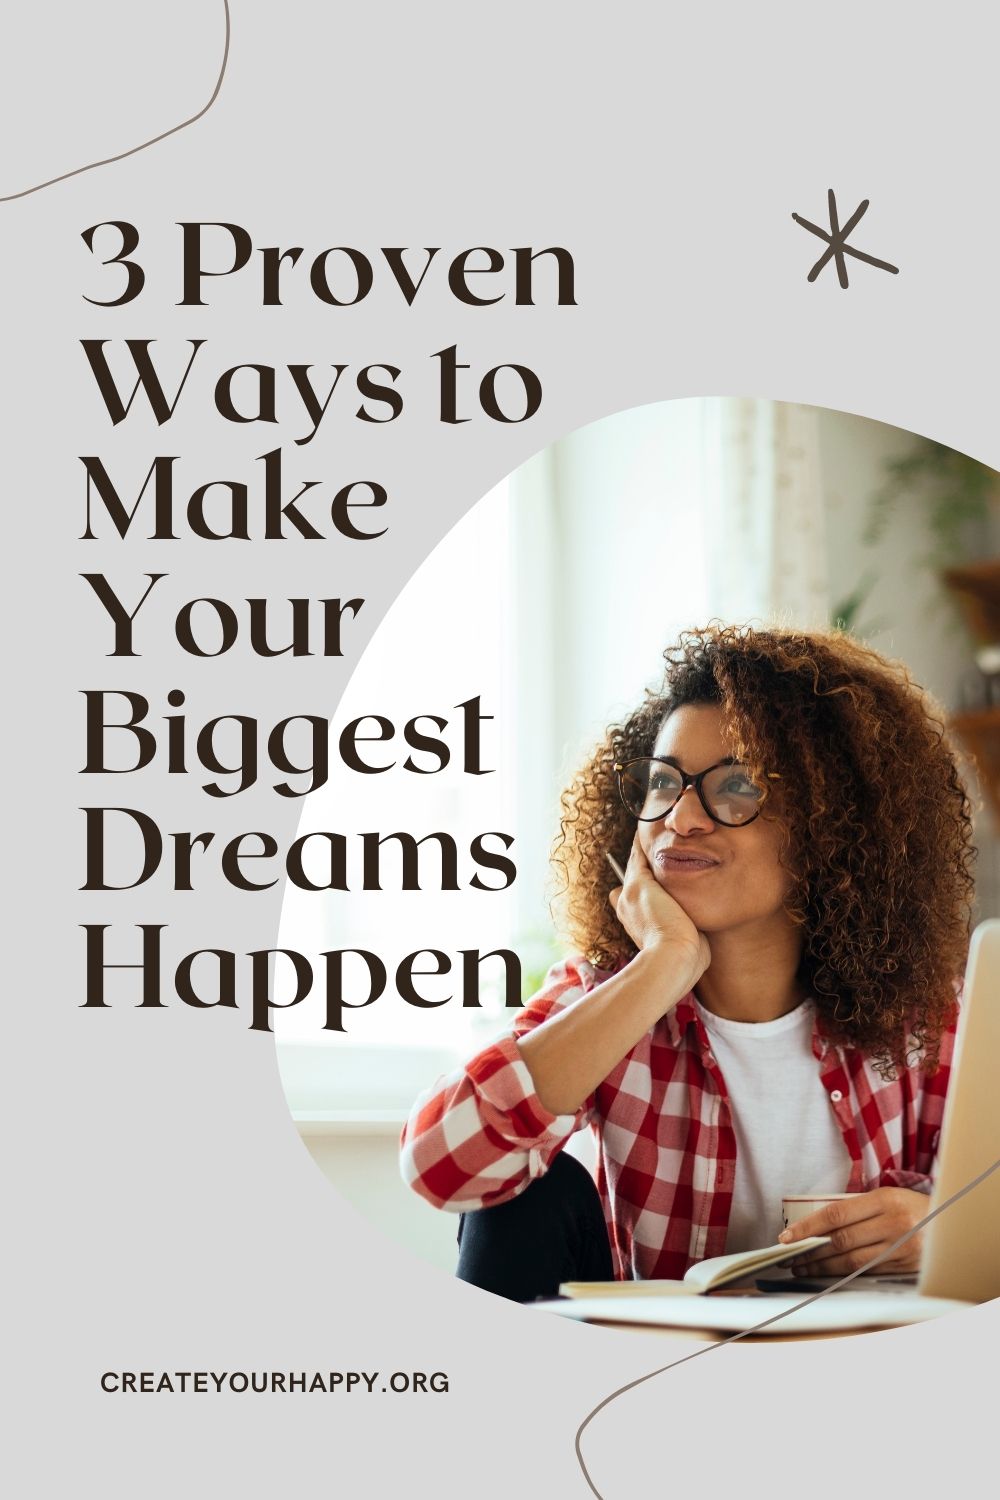 3 Proven Ways to Make Your Biggest Dreams Happen | Create Your Happy